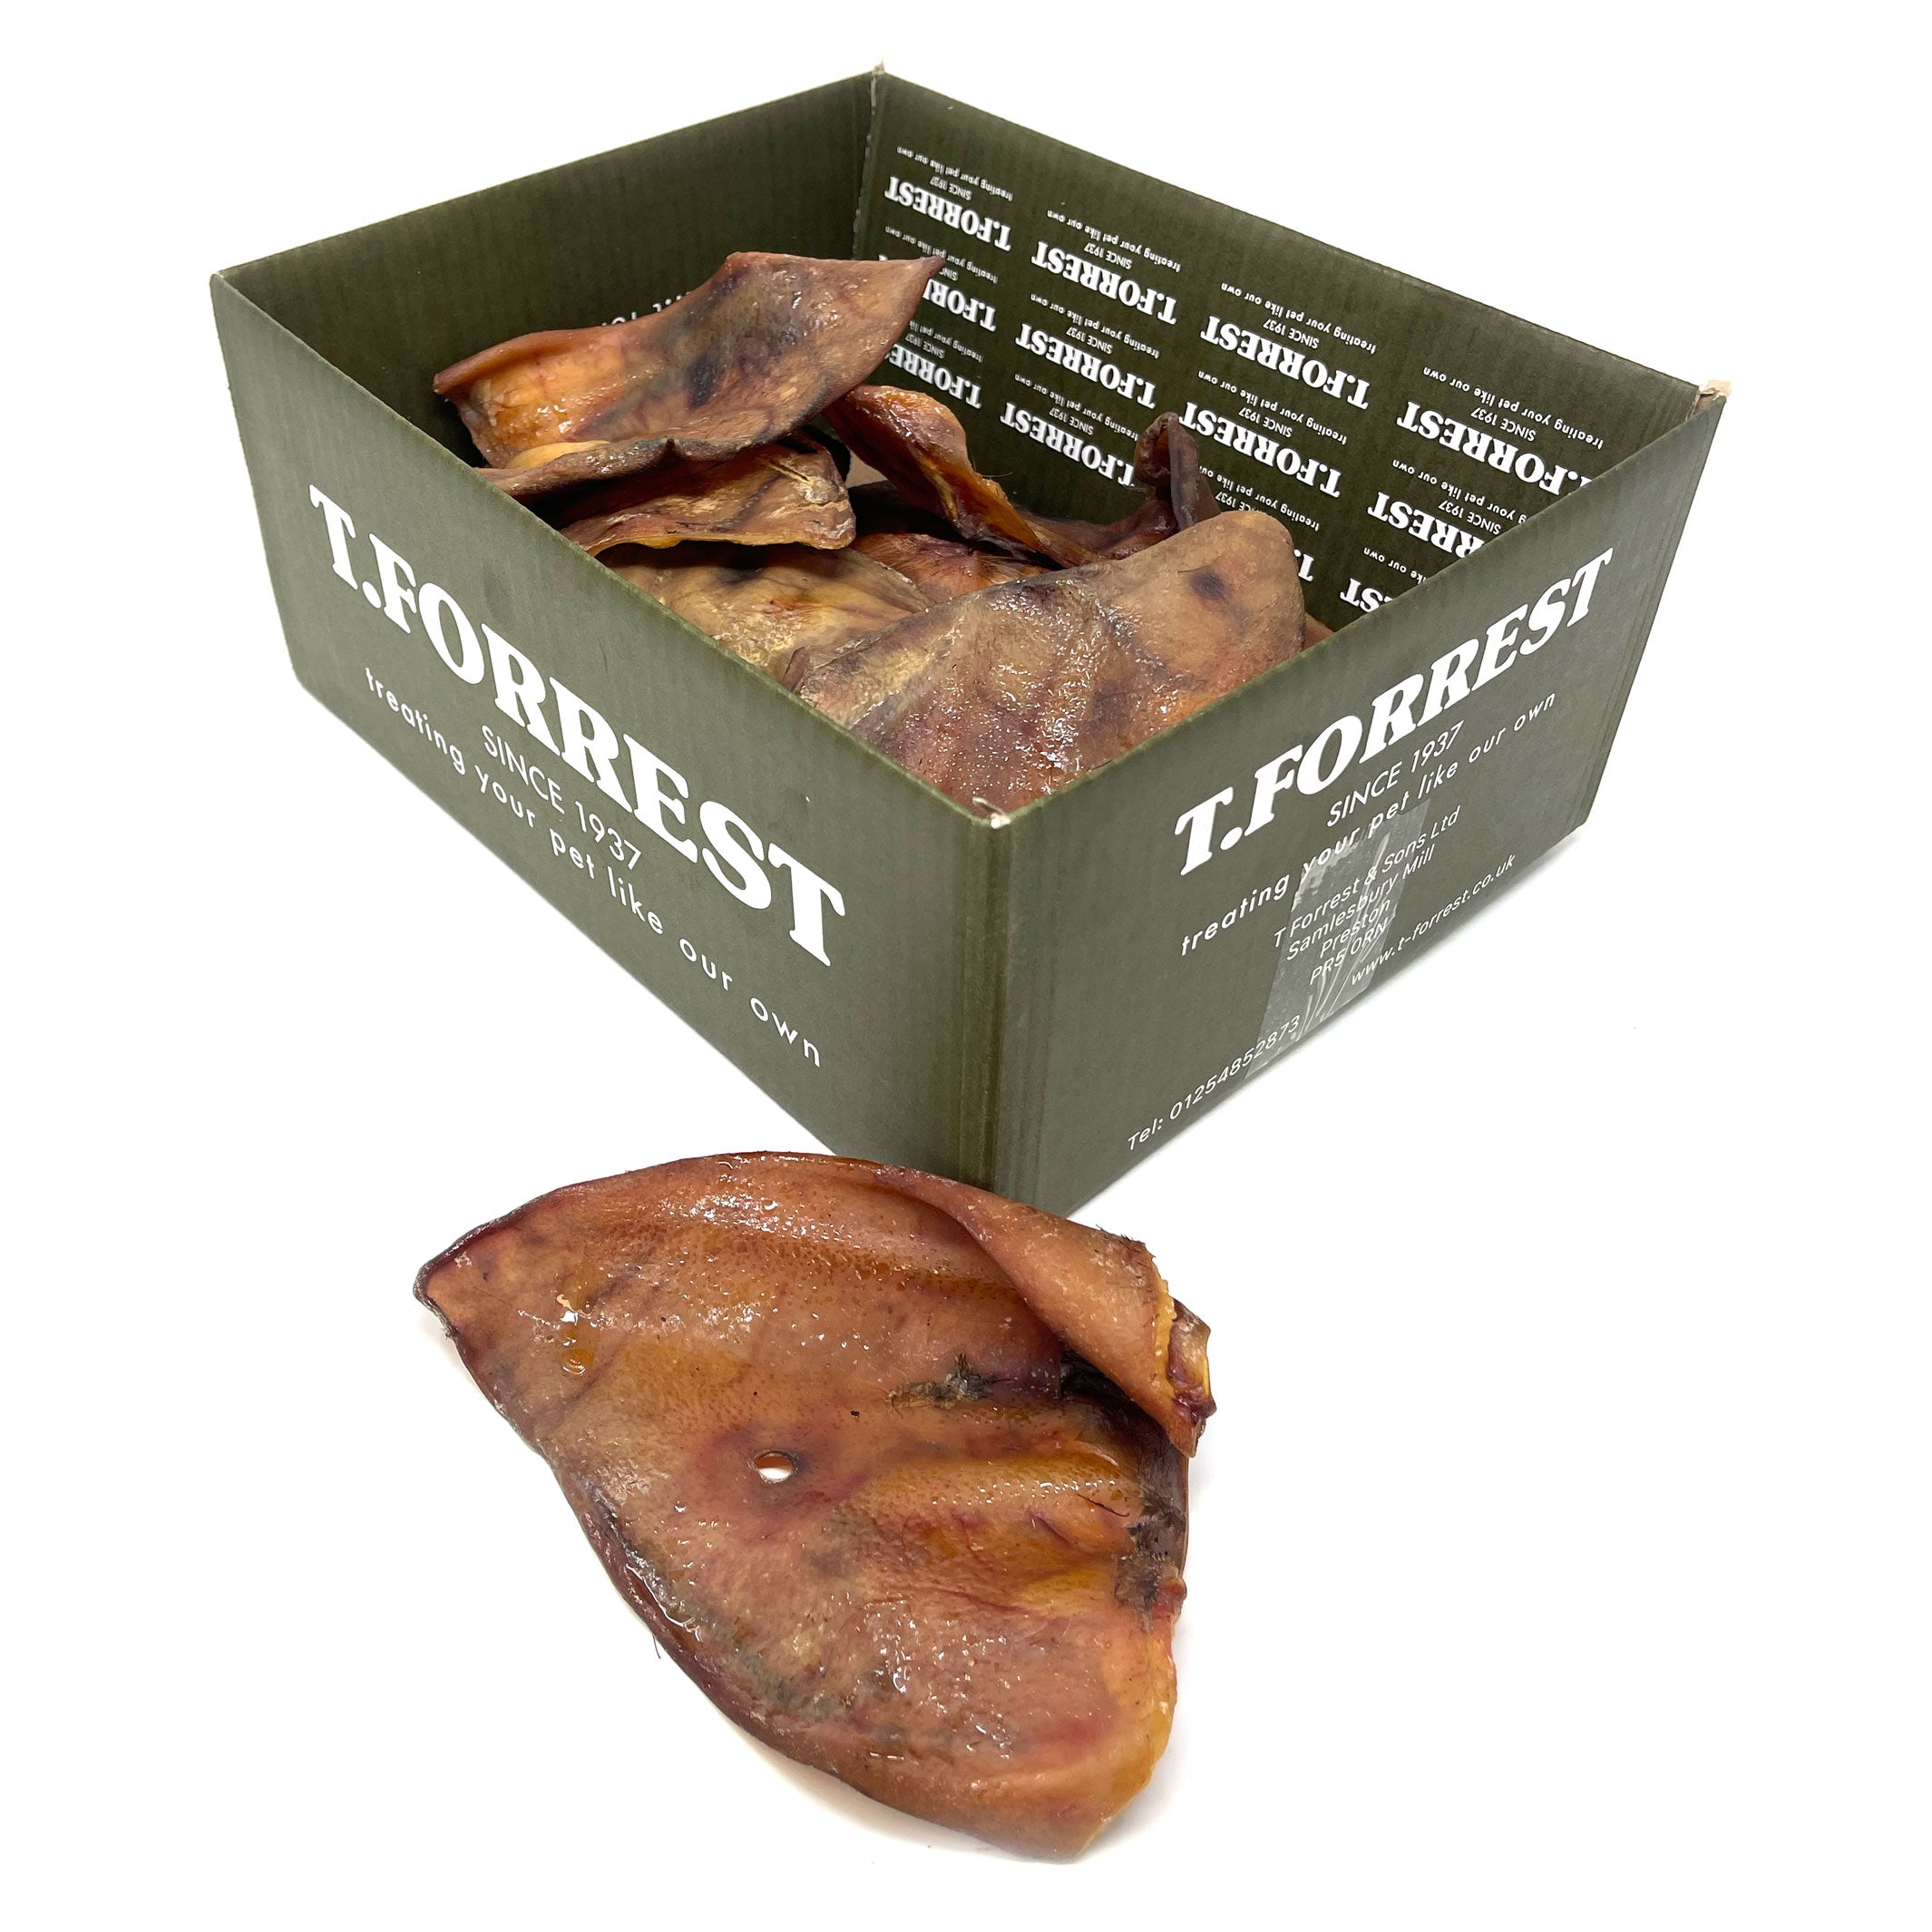 10 large pigs ears for dogs